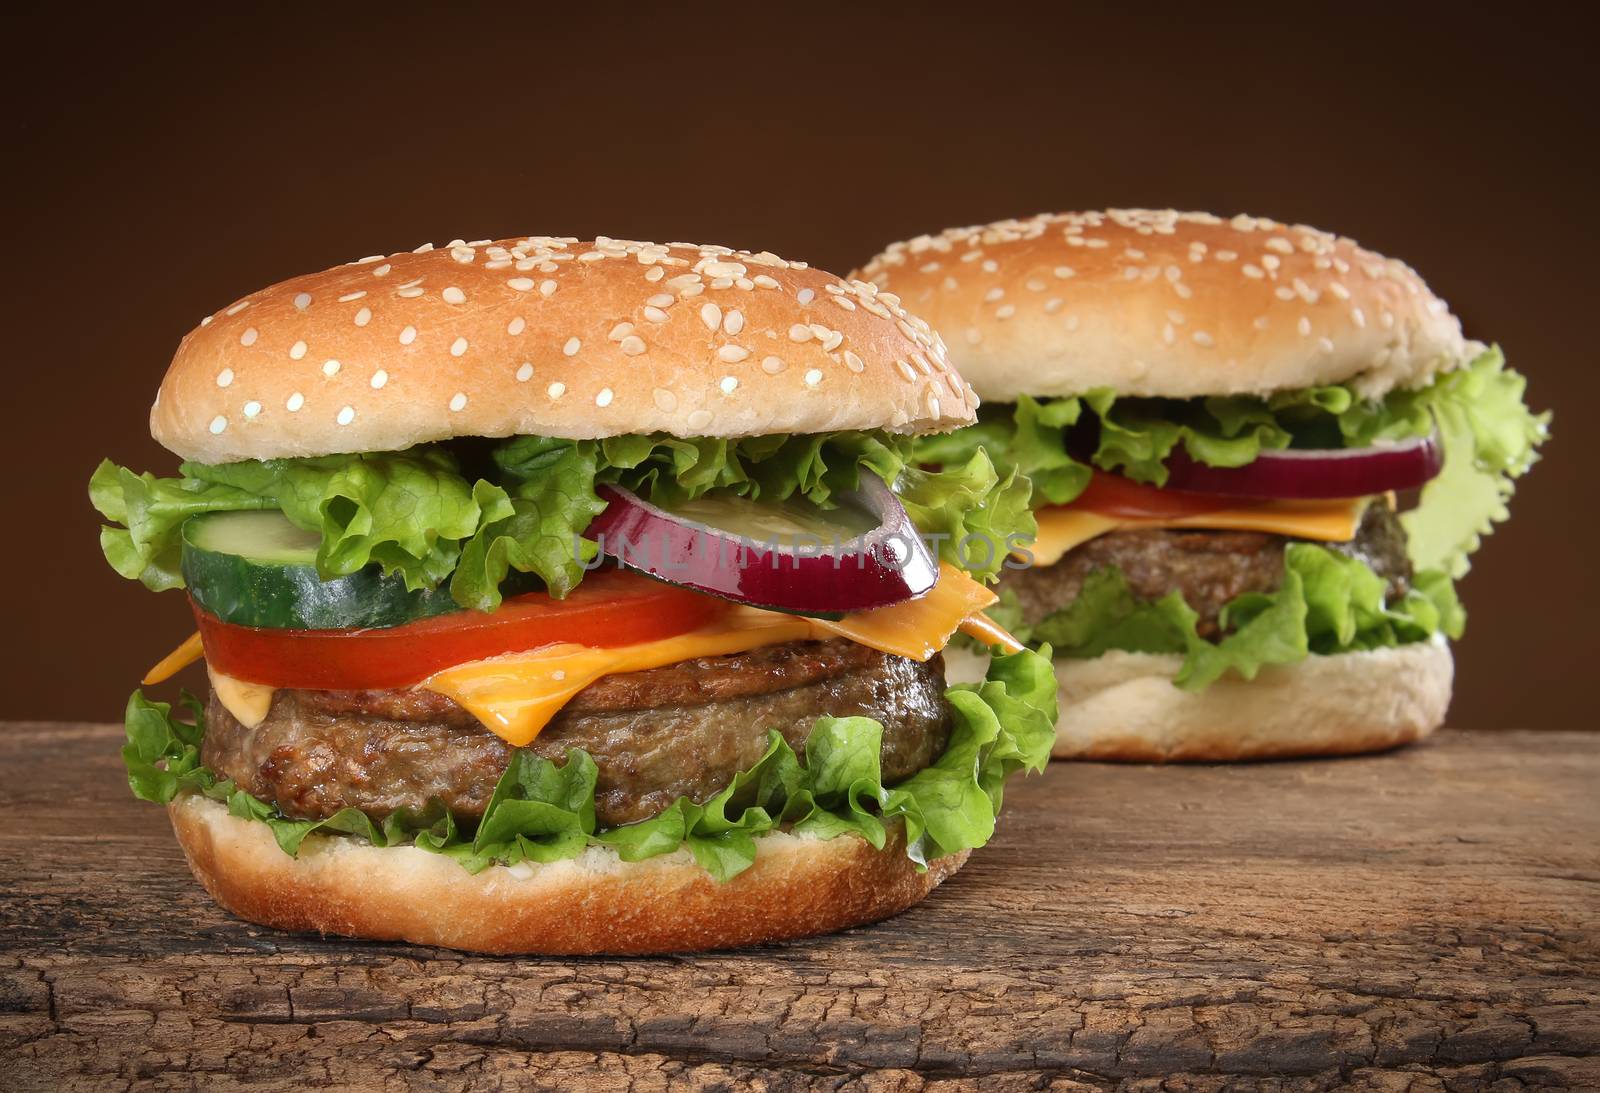 Two delicious hamburgers on wood background.